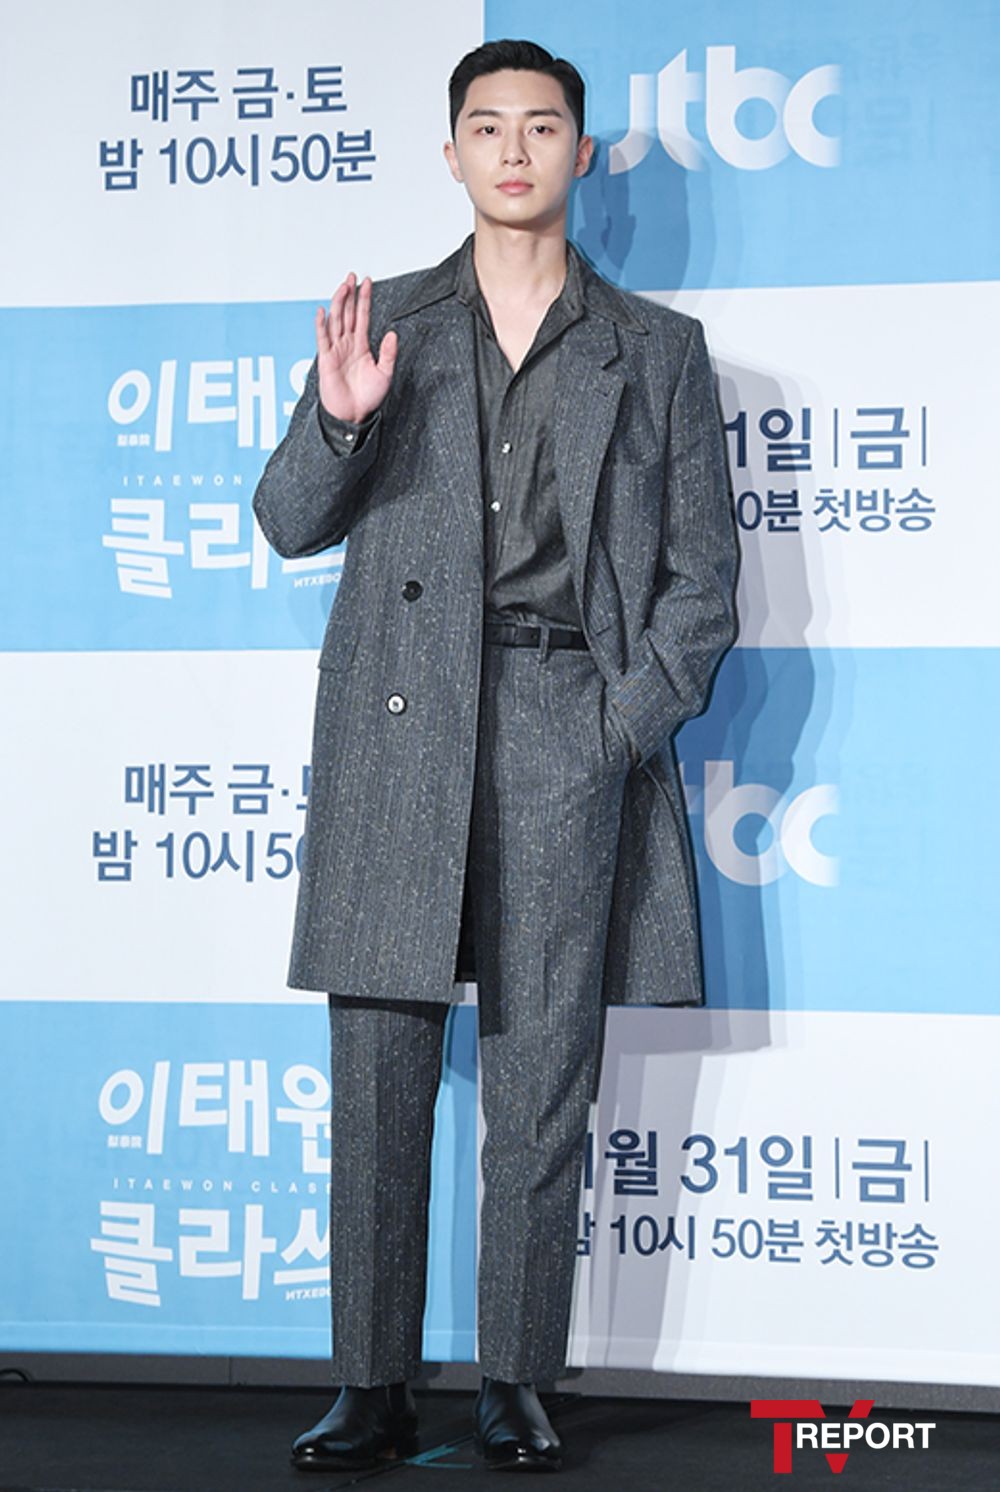 Actor Park Seo-joon attended the JTBC gilt drama Itaewon Clath production presentation held at the Conrad Hotel in Yeouido, Seoul Youngdeungpo District on the afternoon of the 30th.Itaewon Klath is a work that depicts the Hip Rebellion of Youths, who are united in an unreasonable world, stubbornness and passengerhood, and will be broadcast for the first time on the 31st.